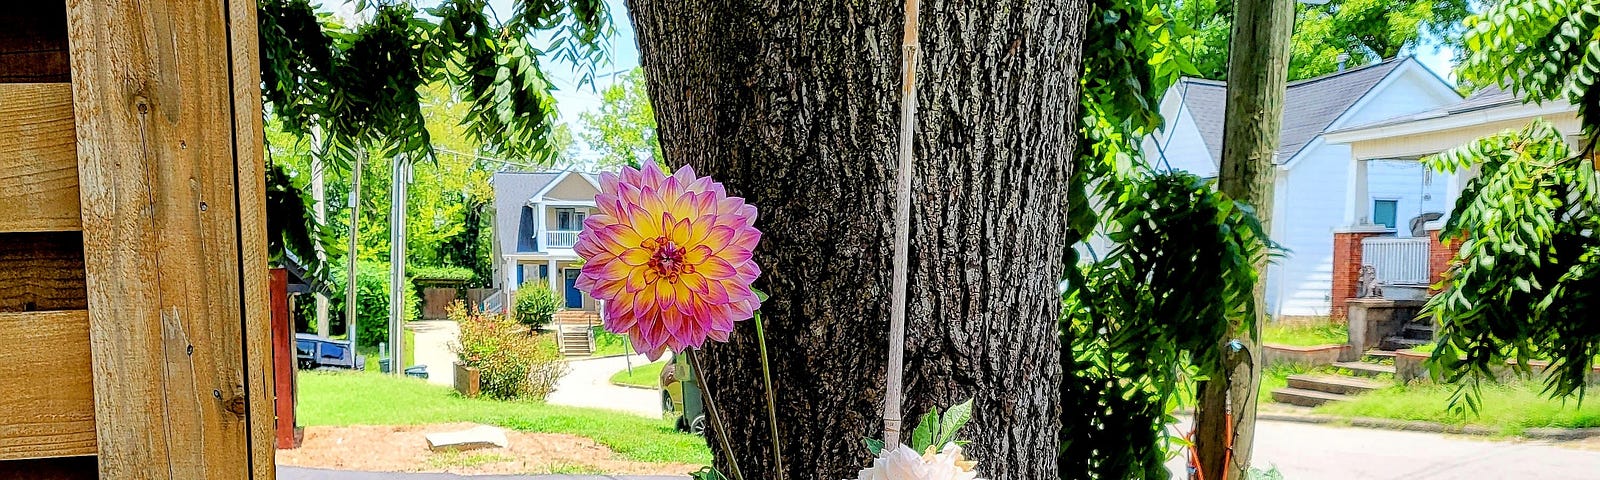 Flowers blooming in front of a tree on a neighborhood street